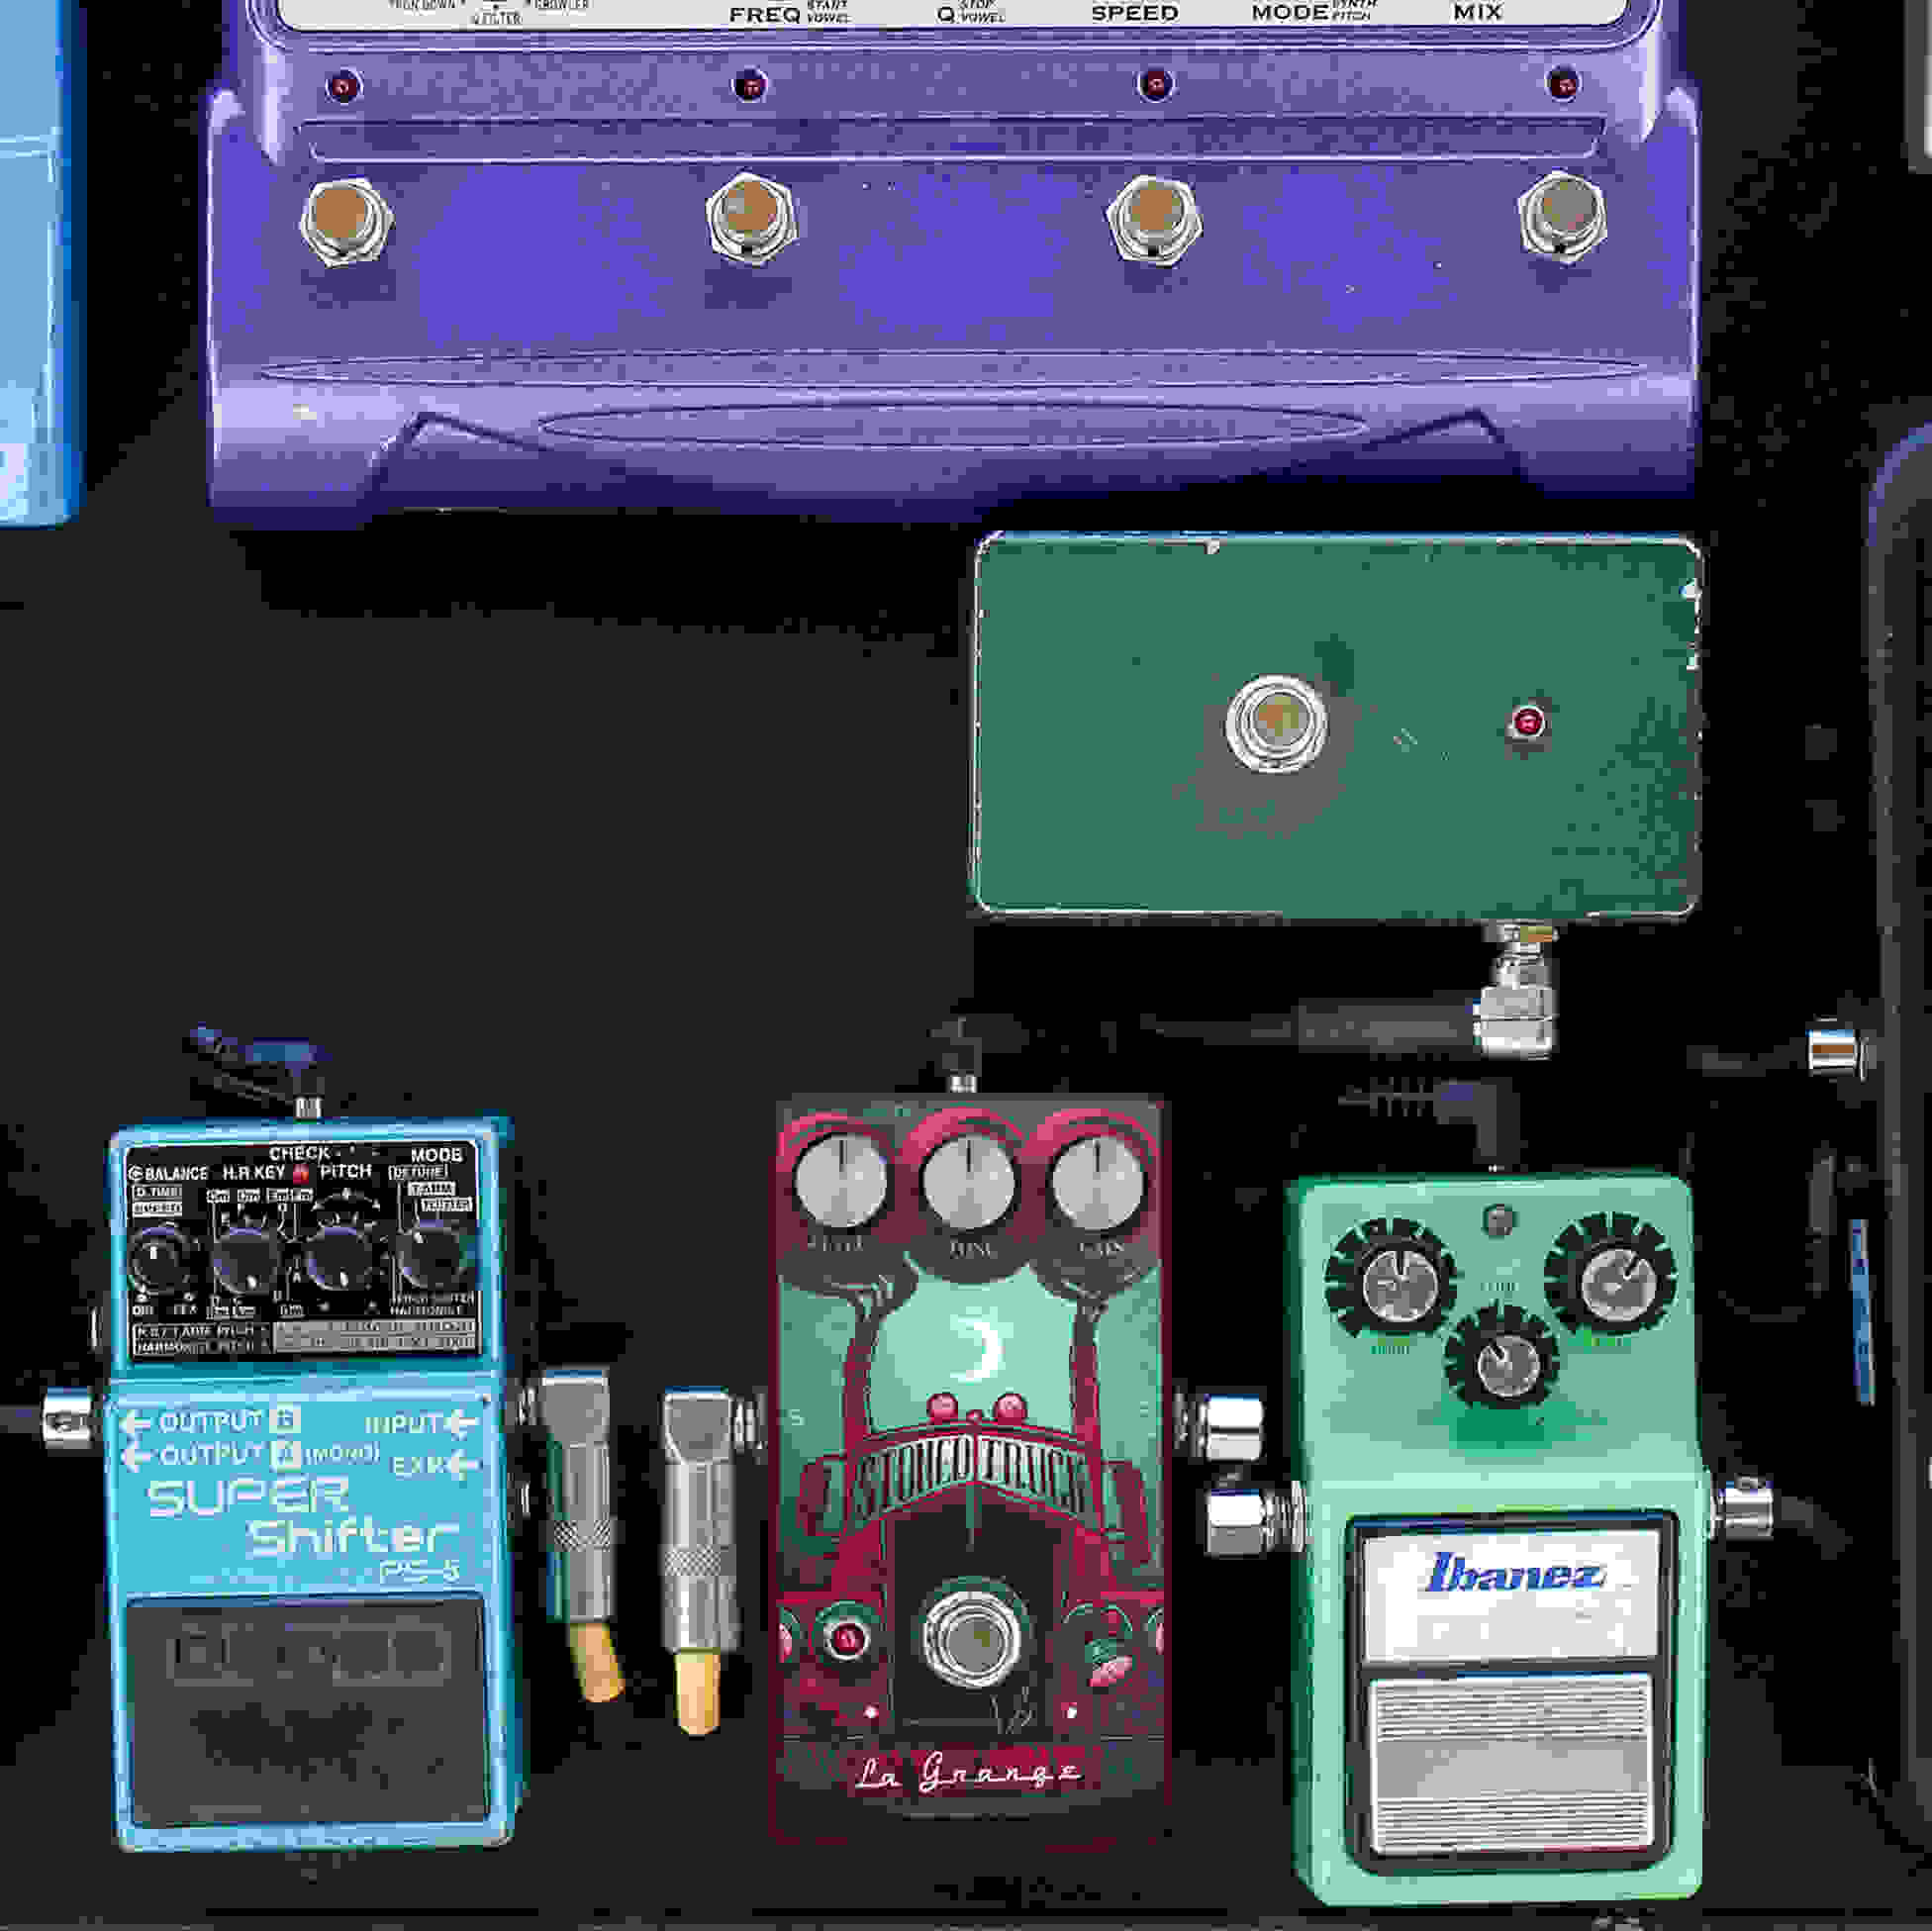 Despite its small size, the pedal stands out among others on the pedalboard.